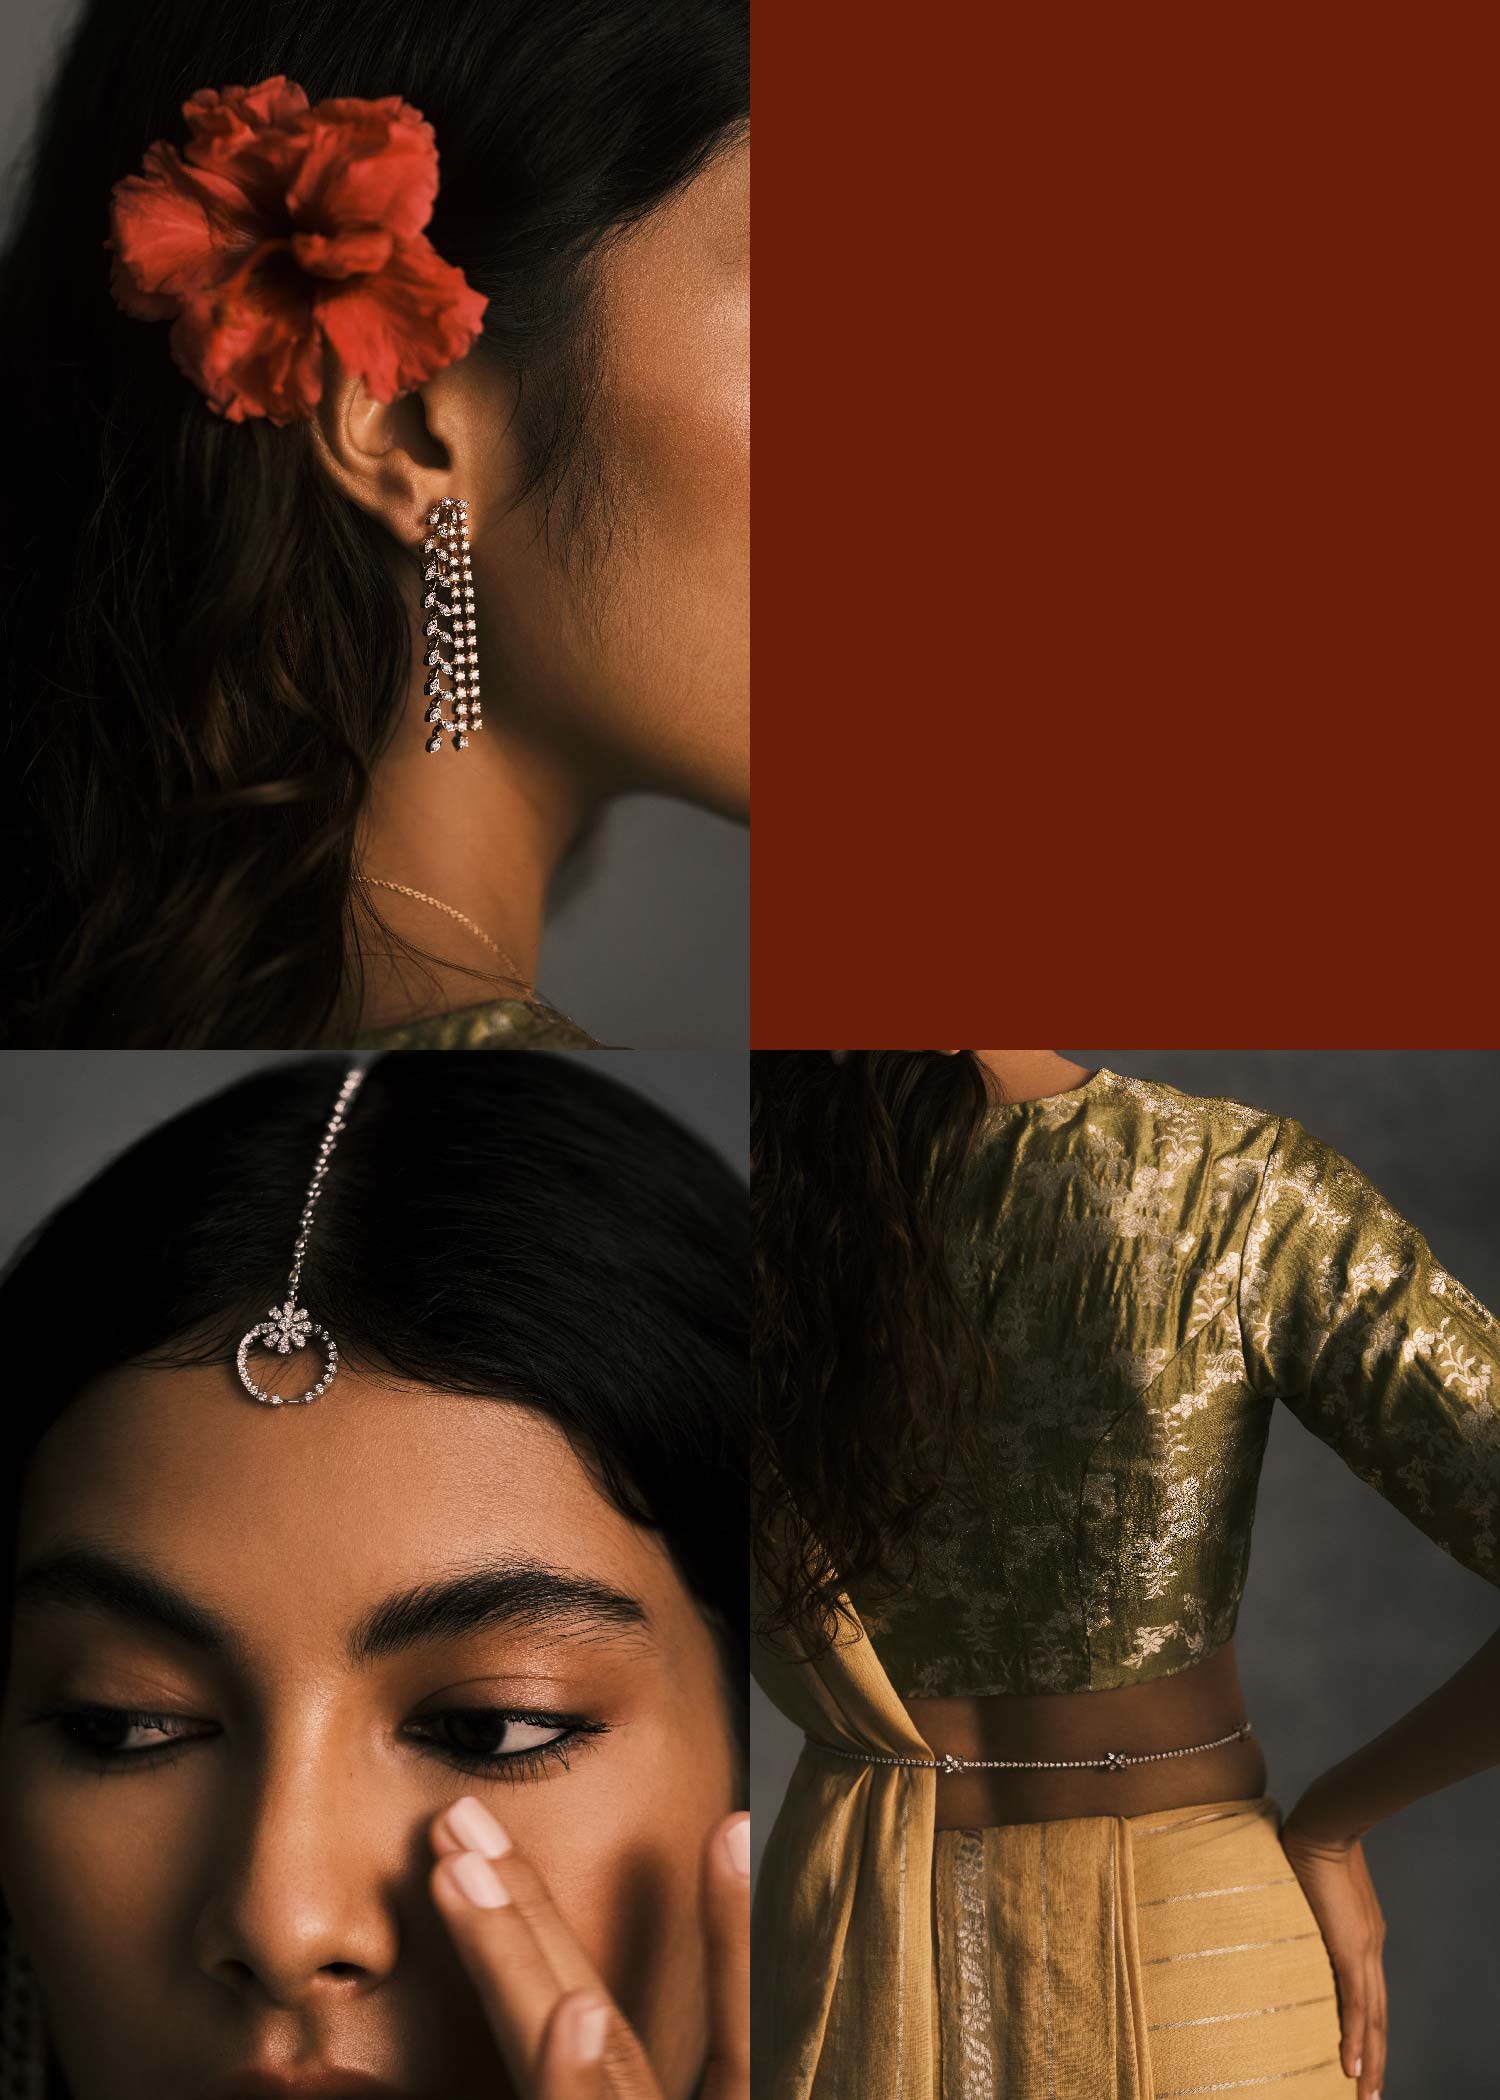 Maumita's Radiant Look: Earrings, Necklace, Maang Tikka, Waist Belt from Om Jewellers. Sari and Blouse by Maku Textiles